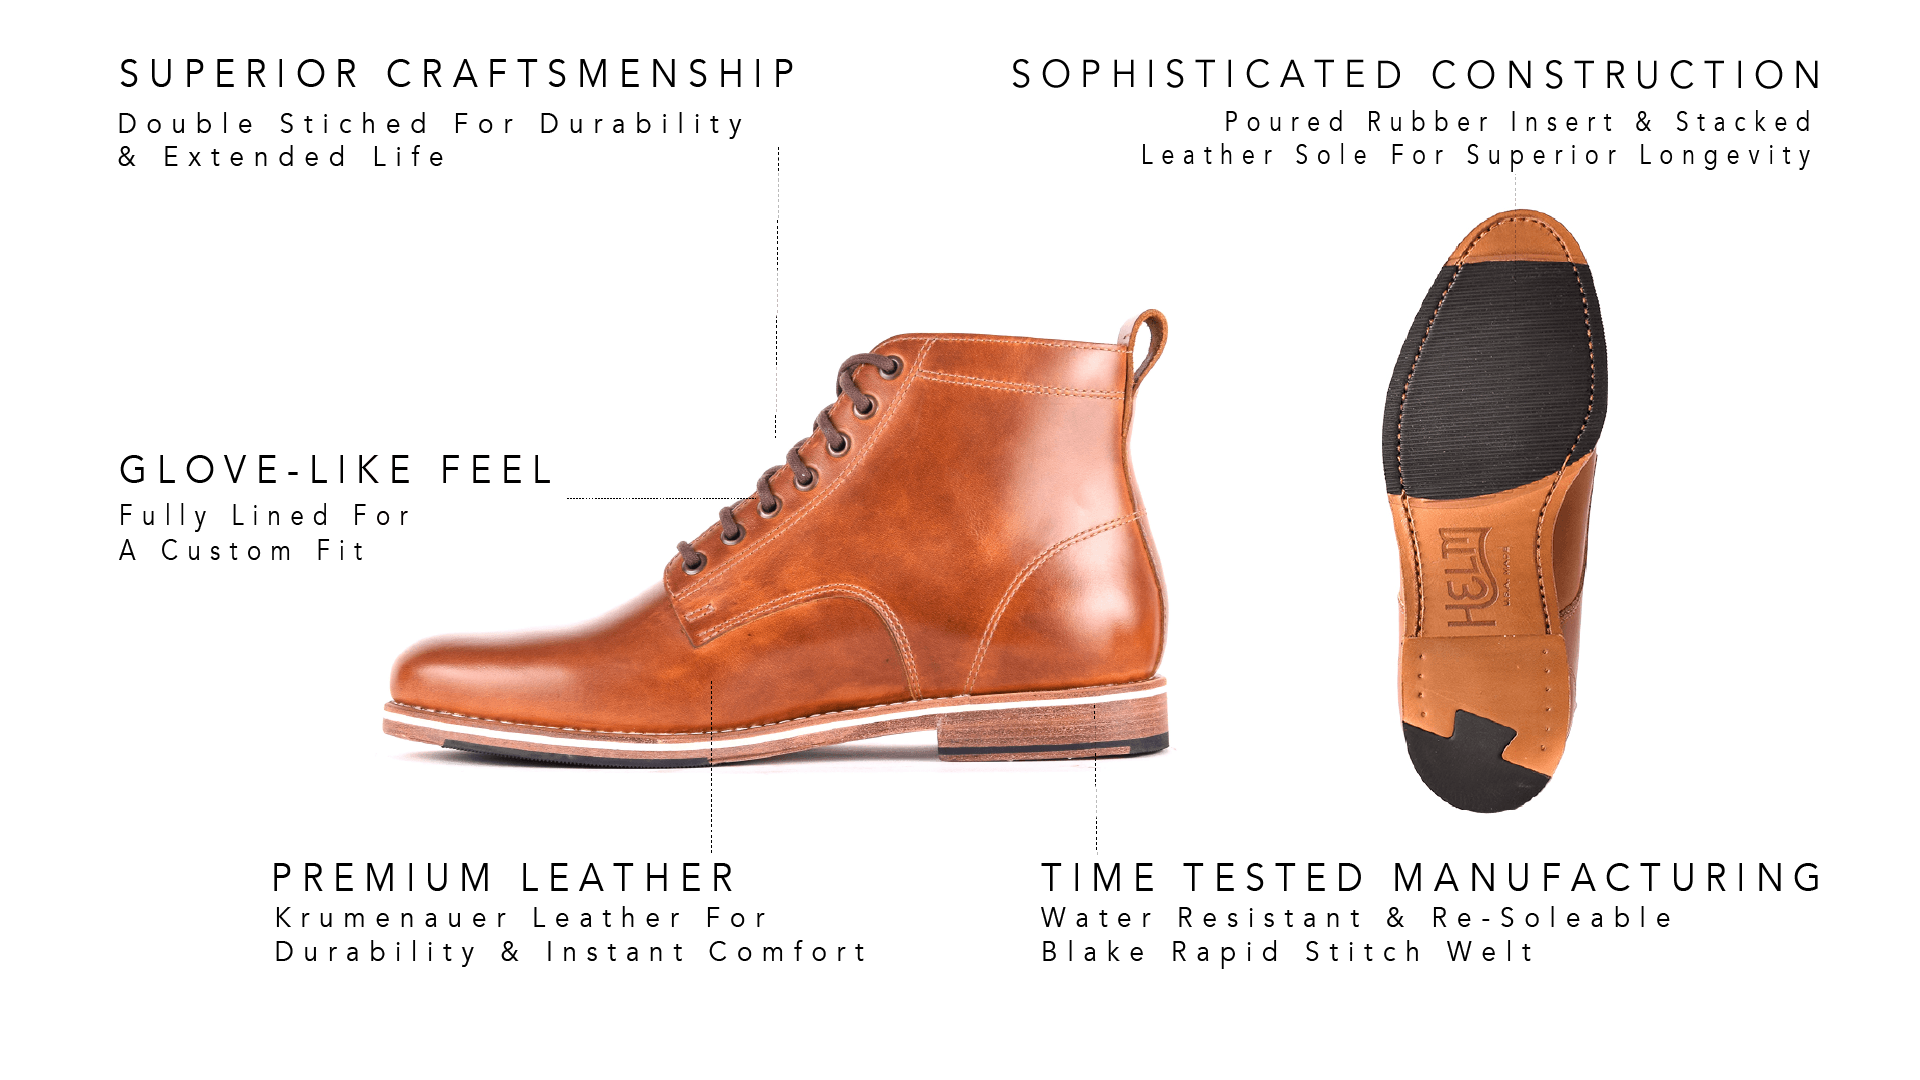 Detailed features for the Zind Teak by HELM Boots